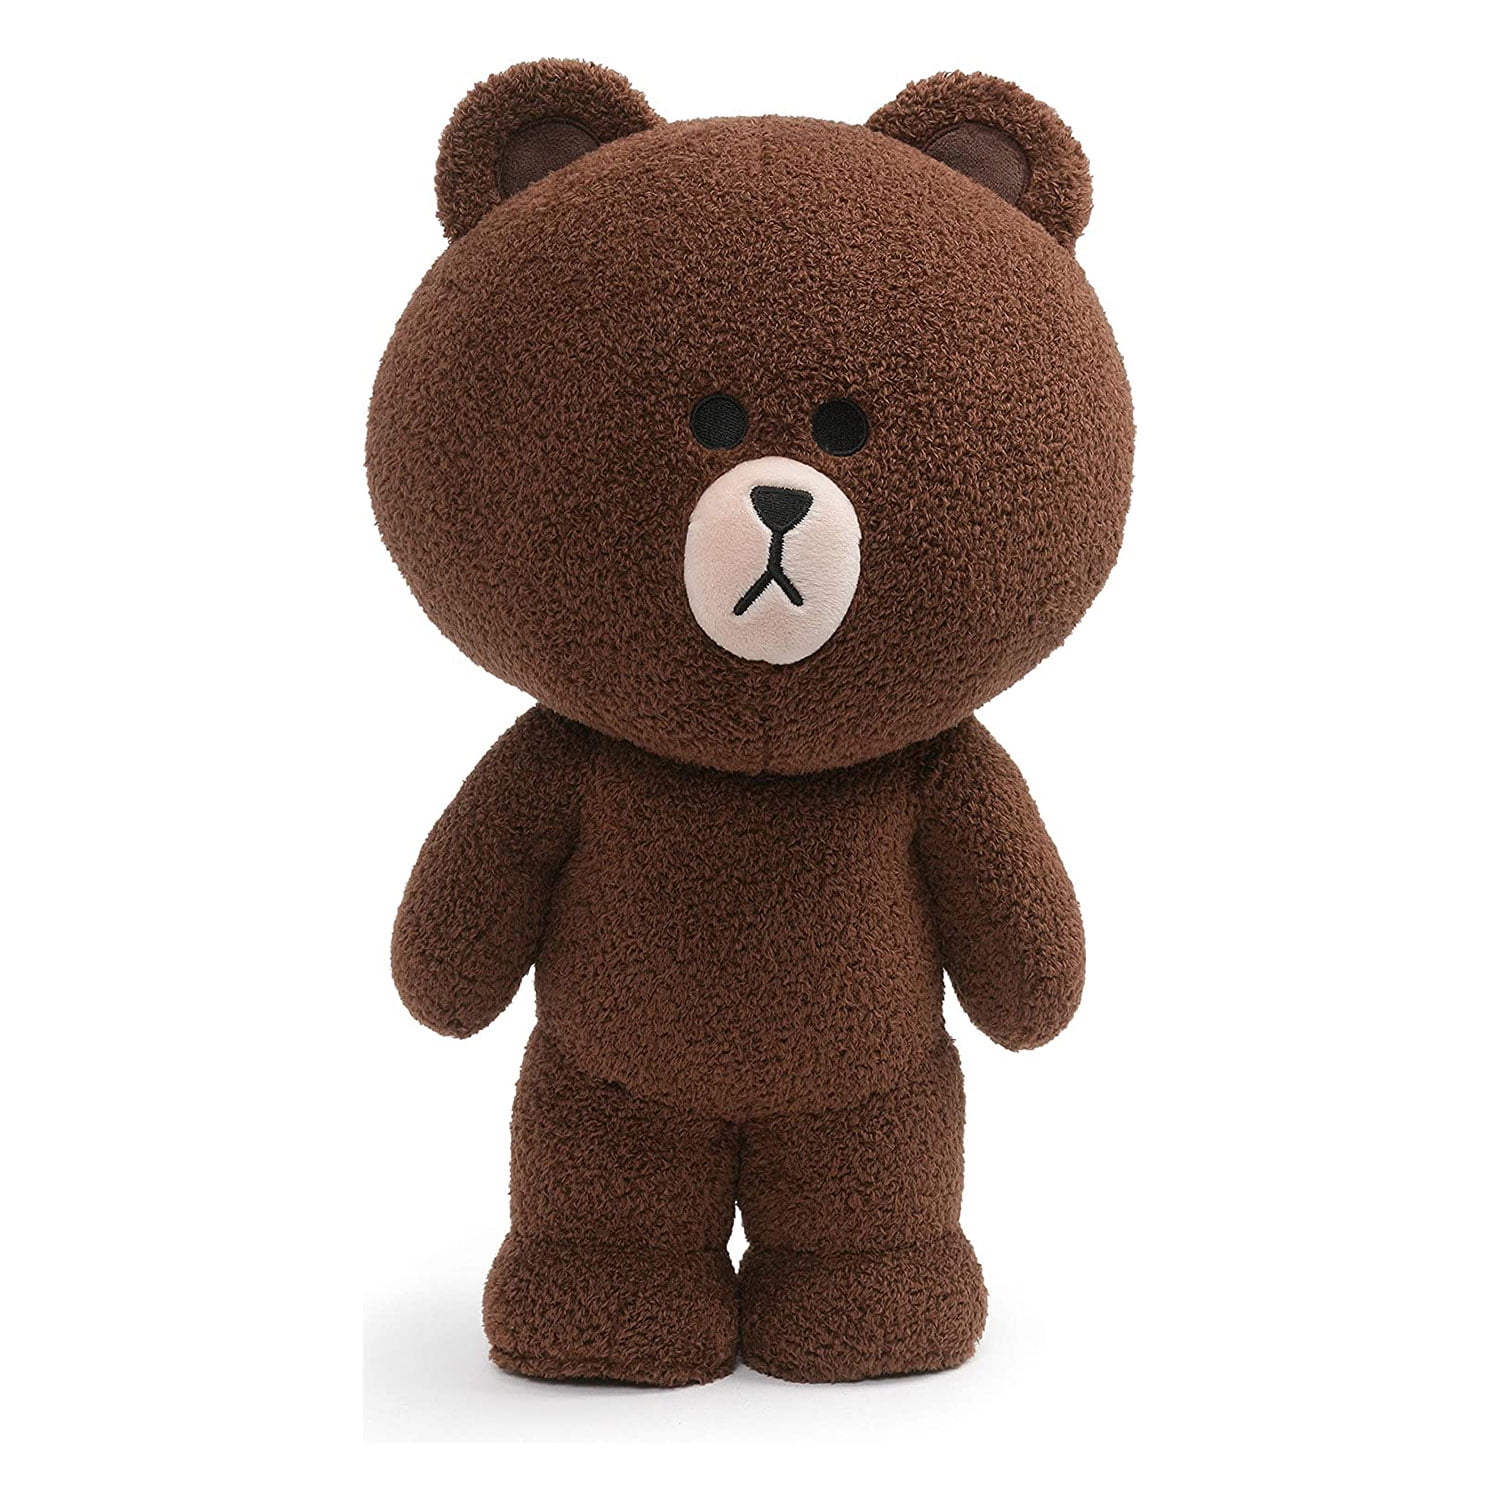 GUND Teddy Bear Brown Plush Stuffed Animal Toy 44184 Exclusively for Kohl's 14in for sale online 